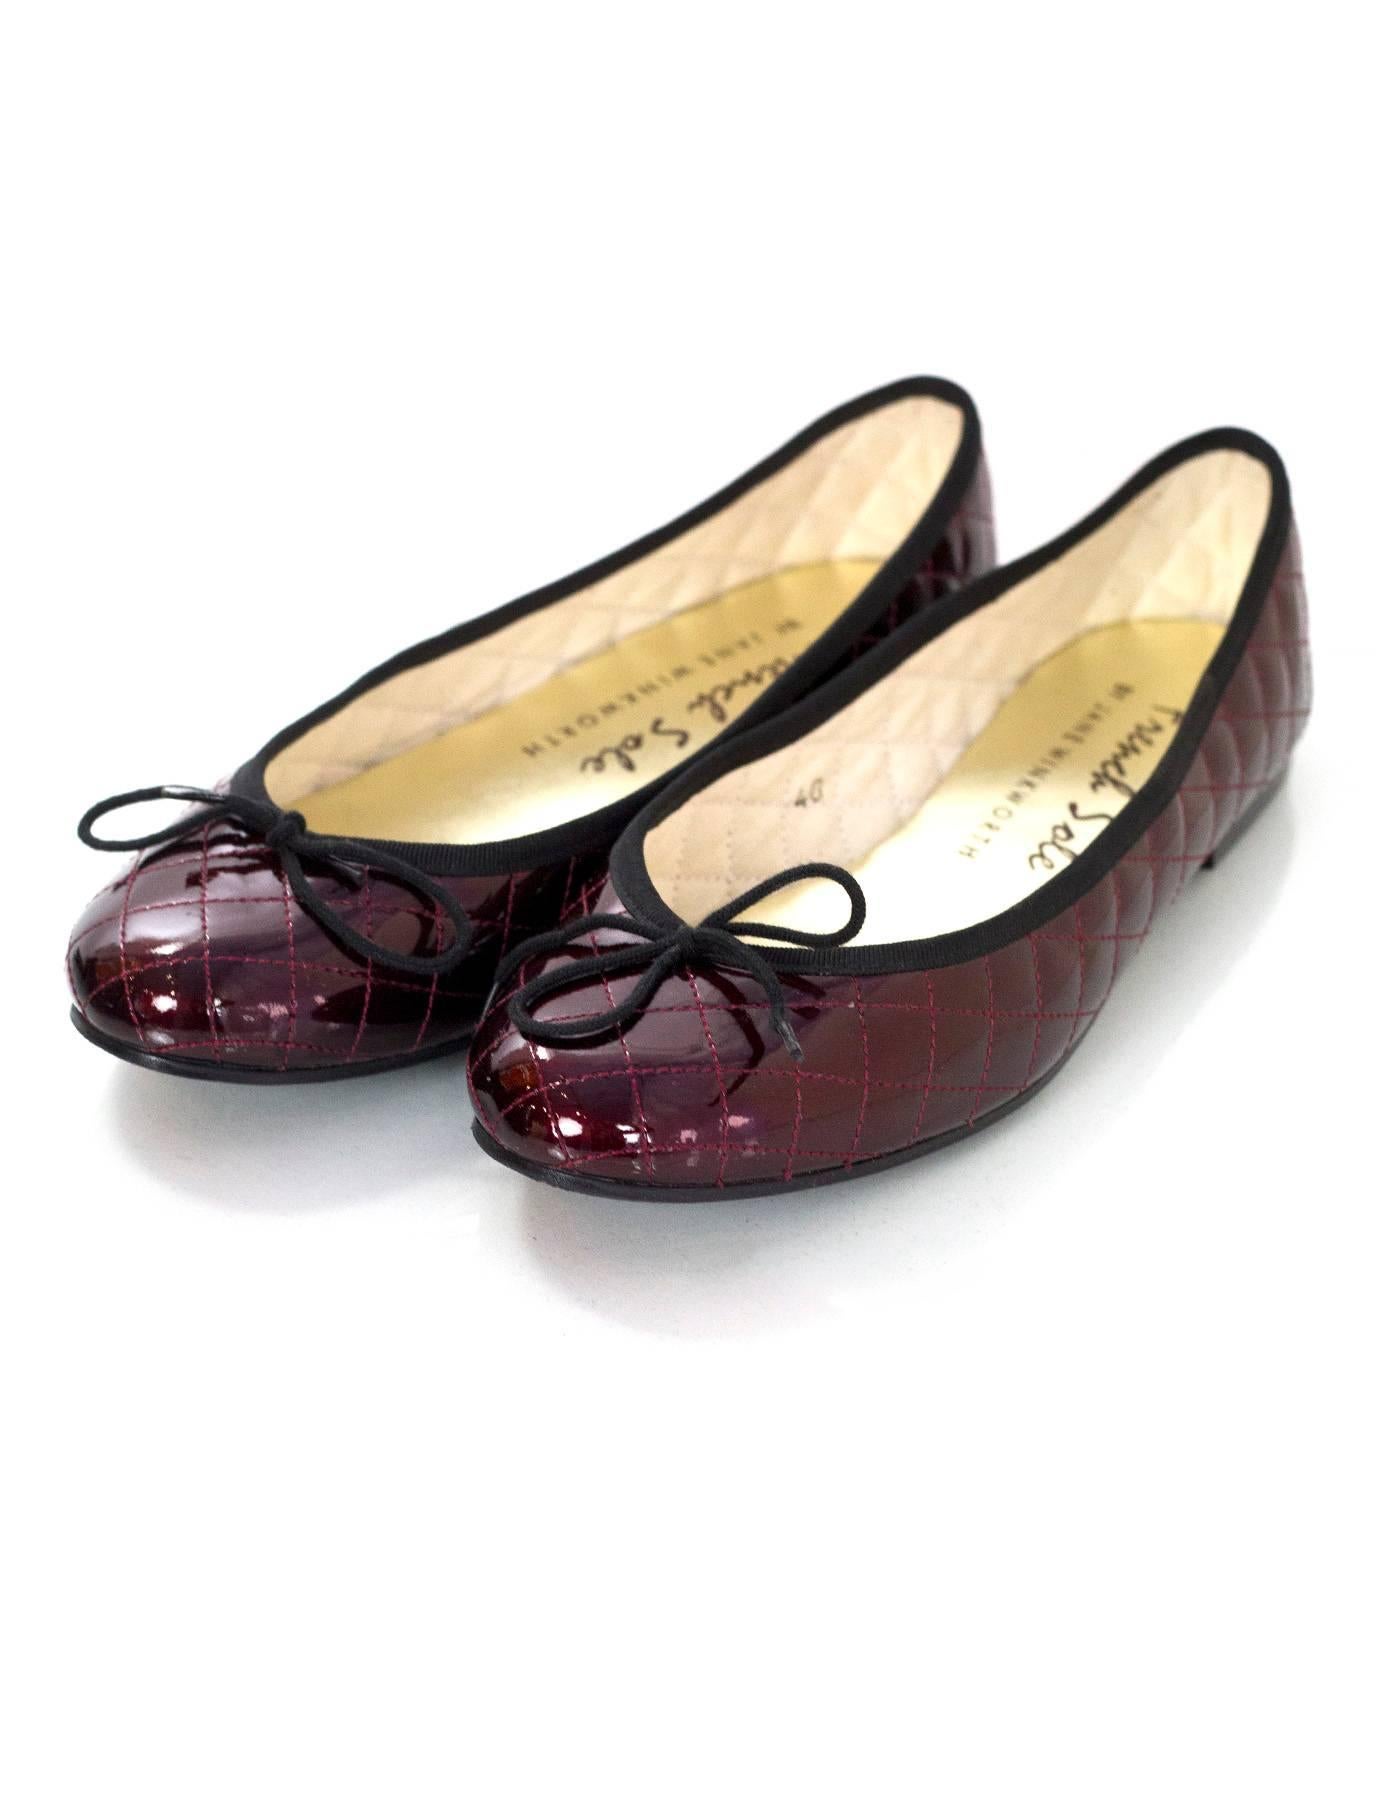 French Sole By Jane Winkworth Burgundy Quilted Patent Leather Ballet Flats Sz 40

Made In: Spain
Color: Burgundy
Materials: Patent leather
Closure/Opening: Slide on
Sole Stamp: 40 Made in spain
Overall Condition: Excellent pre-owned condition with